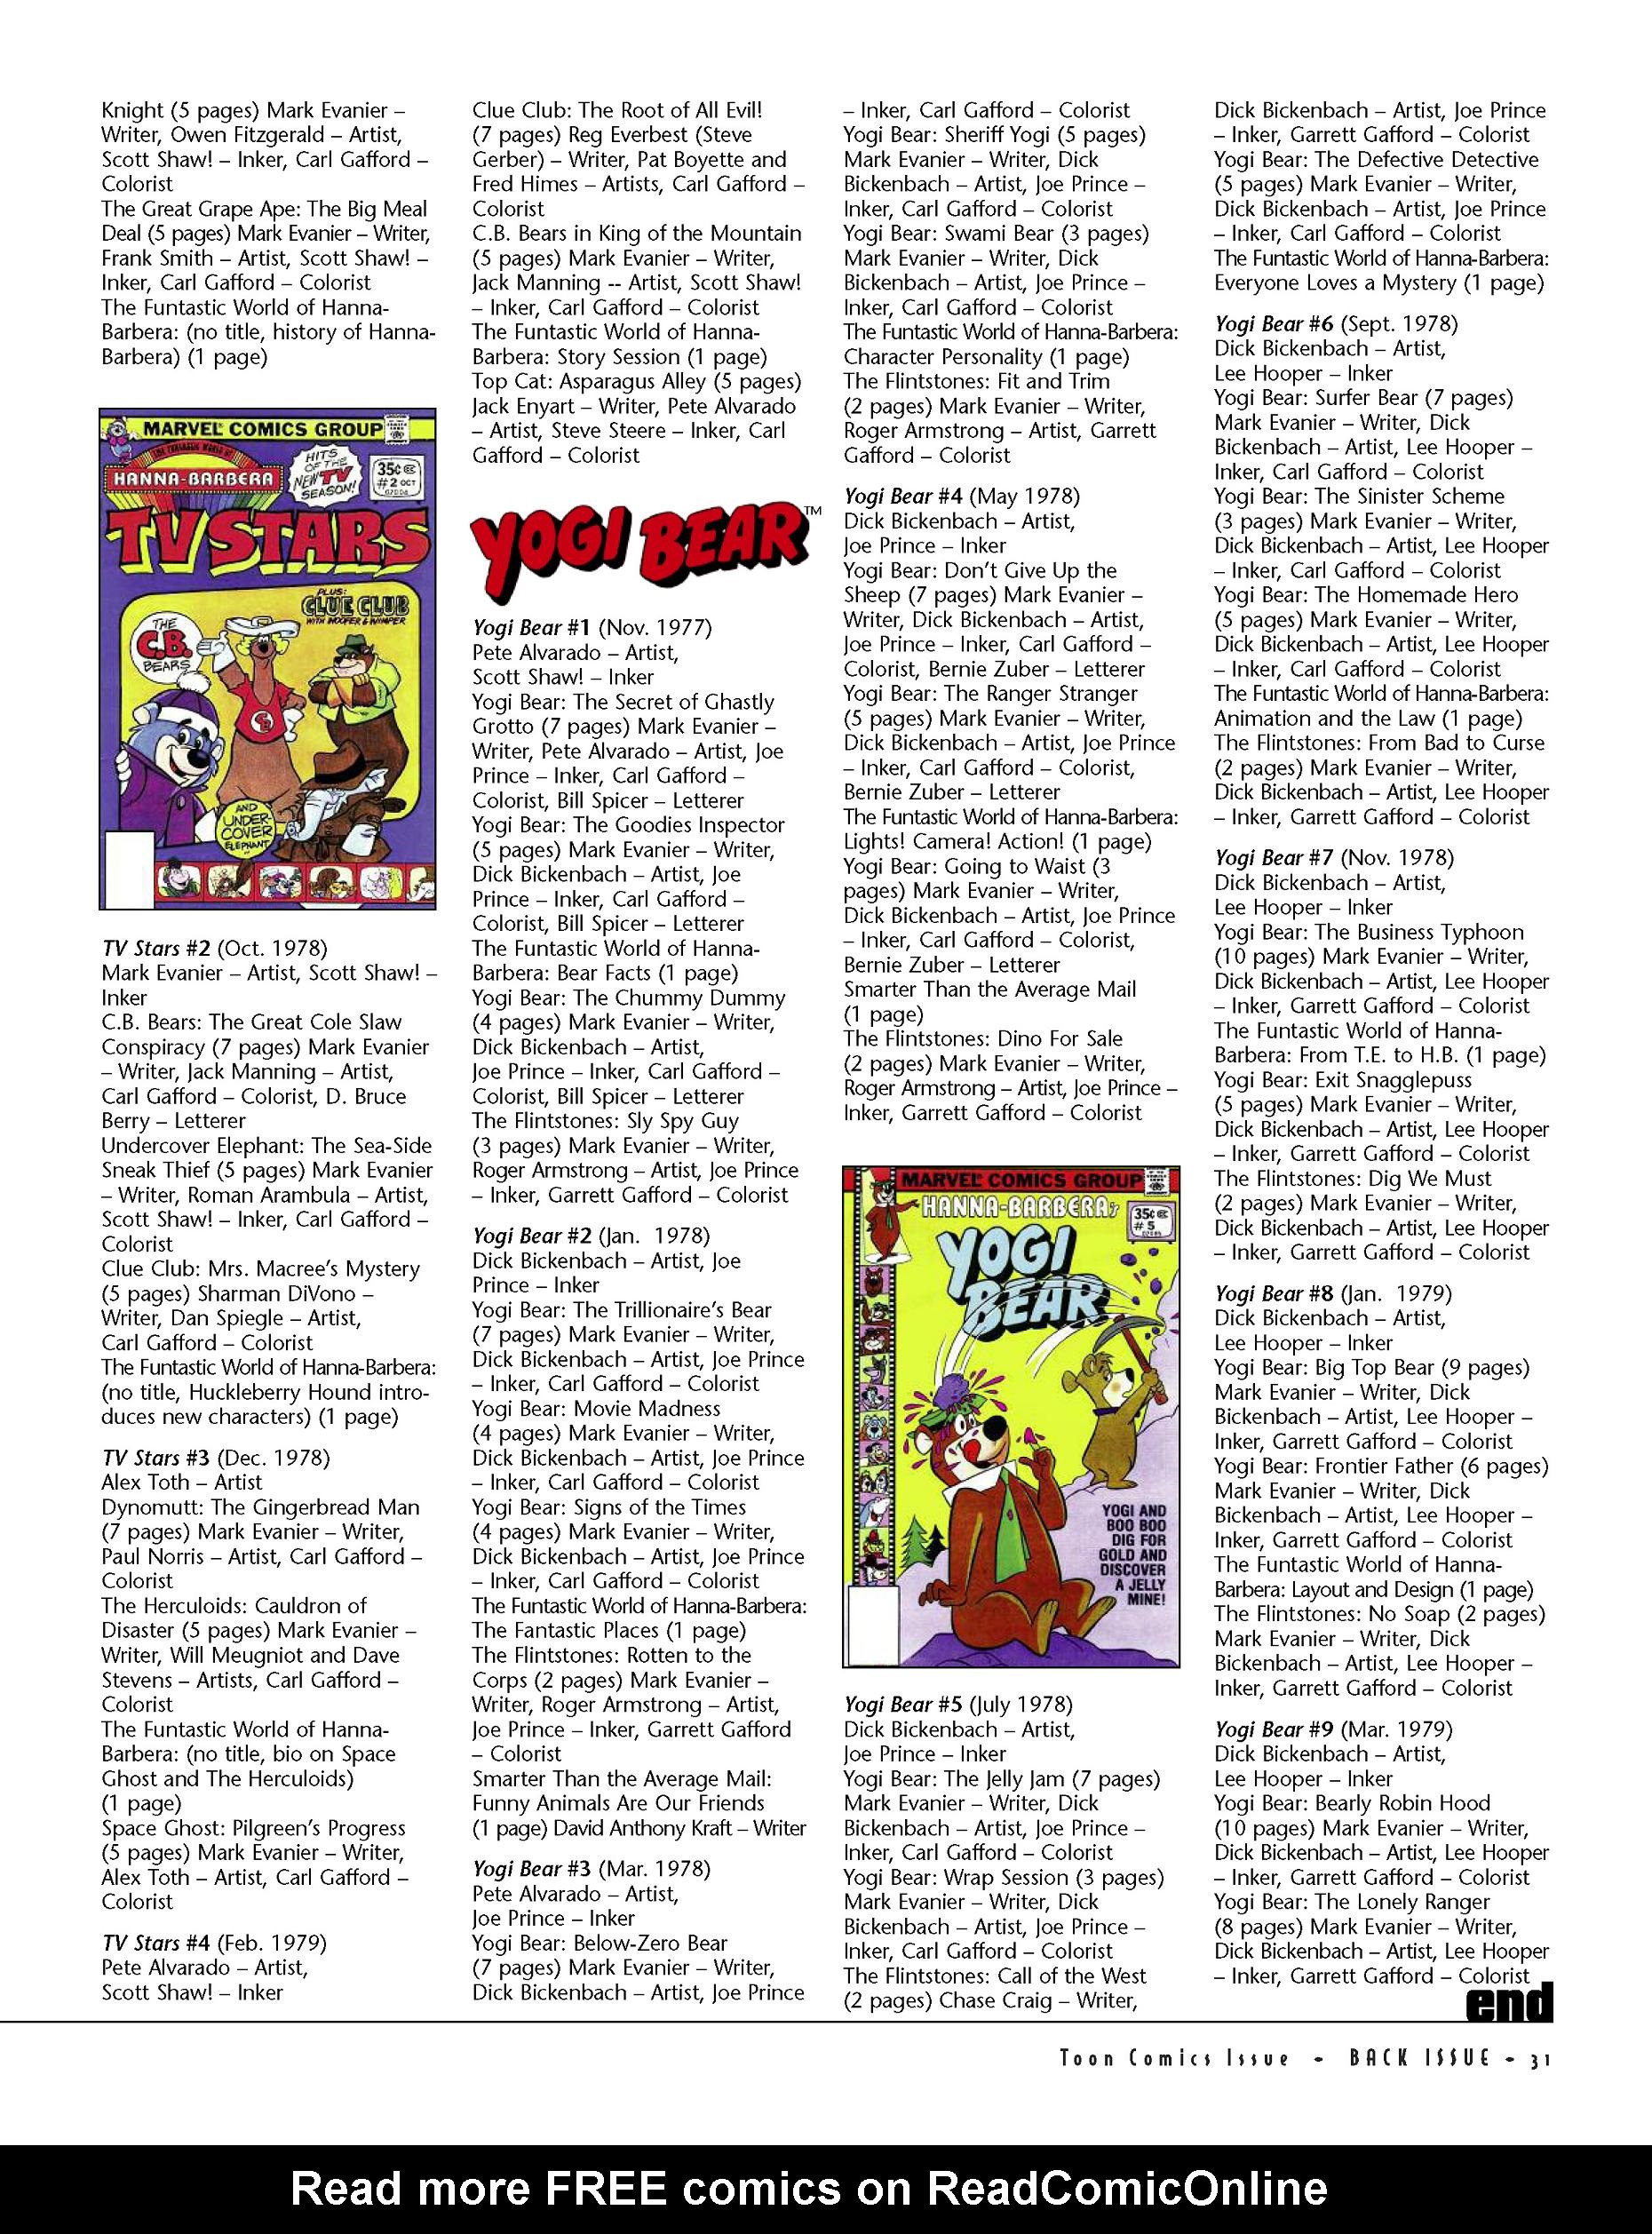 Read online Back Issue comic -  Issue #59 - 31